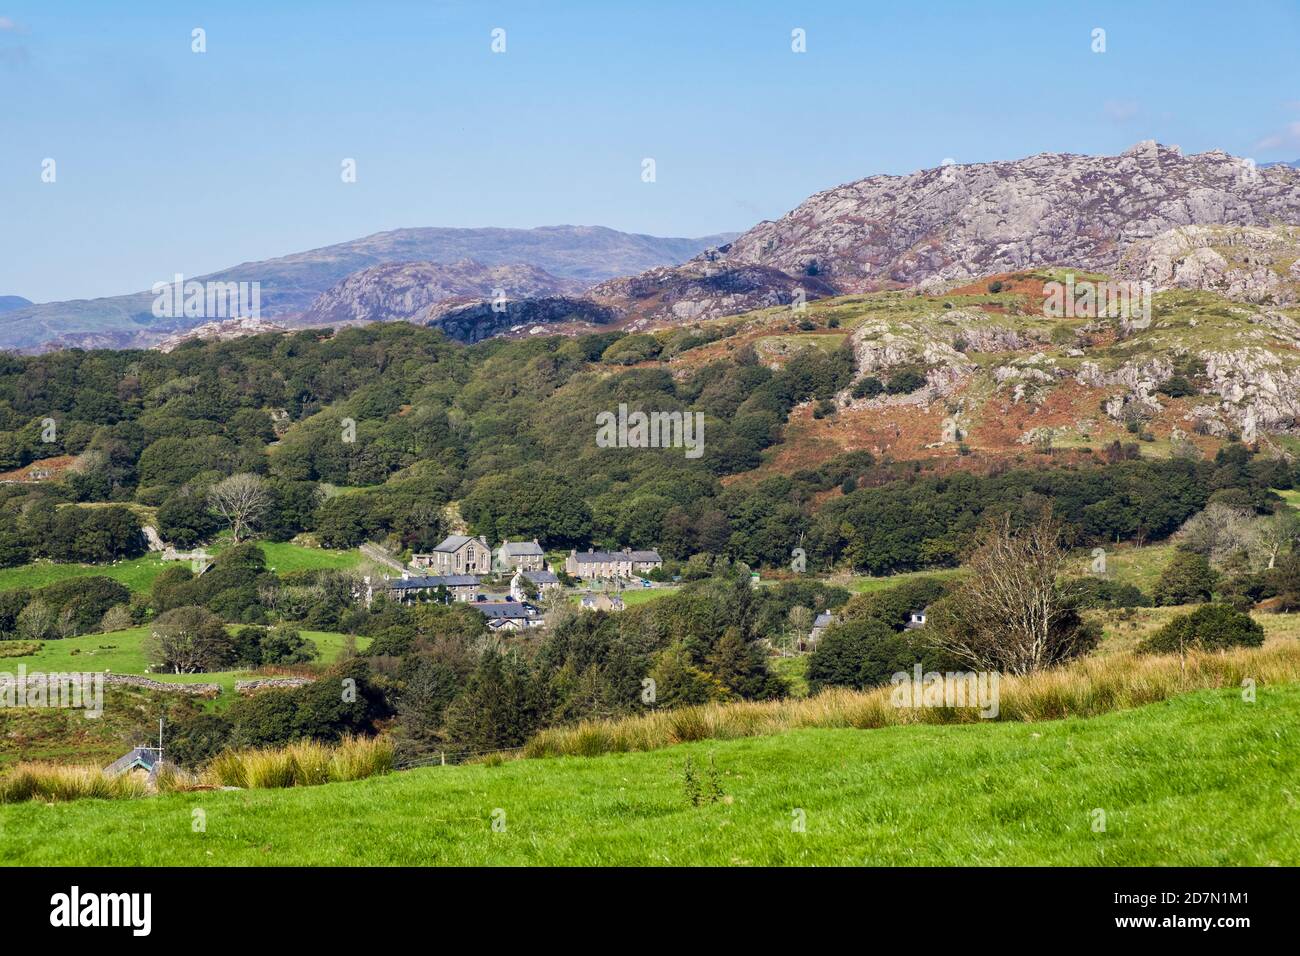 Distant view to old Welsh village in Snowdonia National Park countryside. Croesor, Gwynedd, Wales, UK, Britain Stock Photo